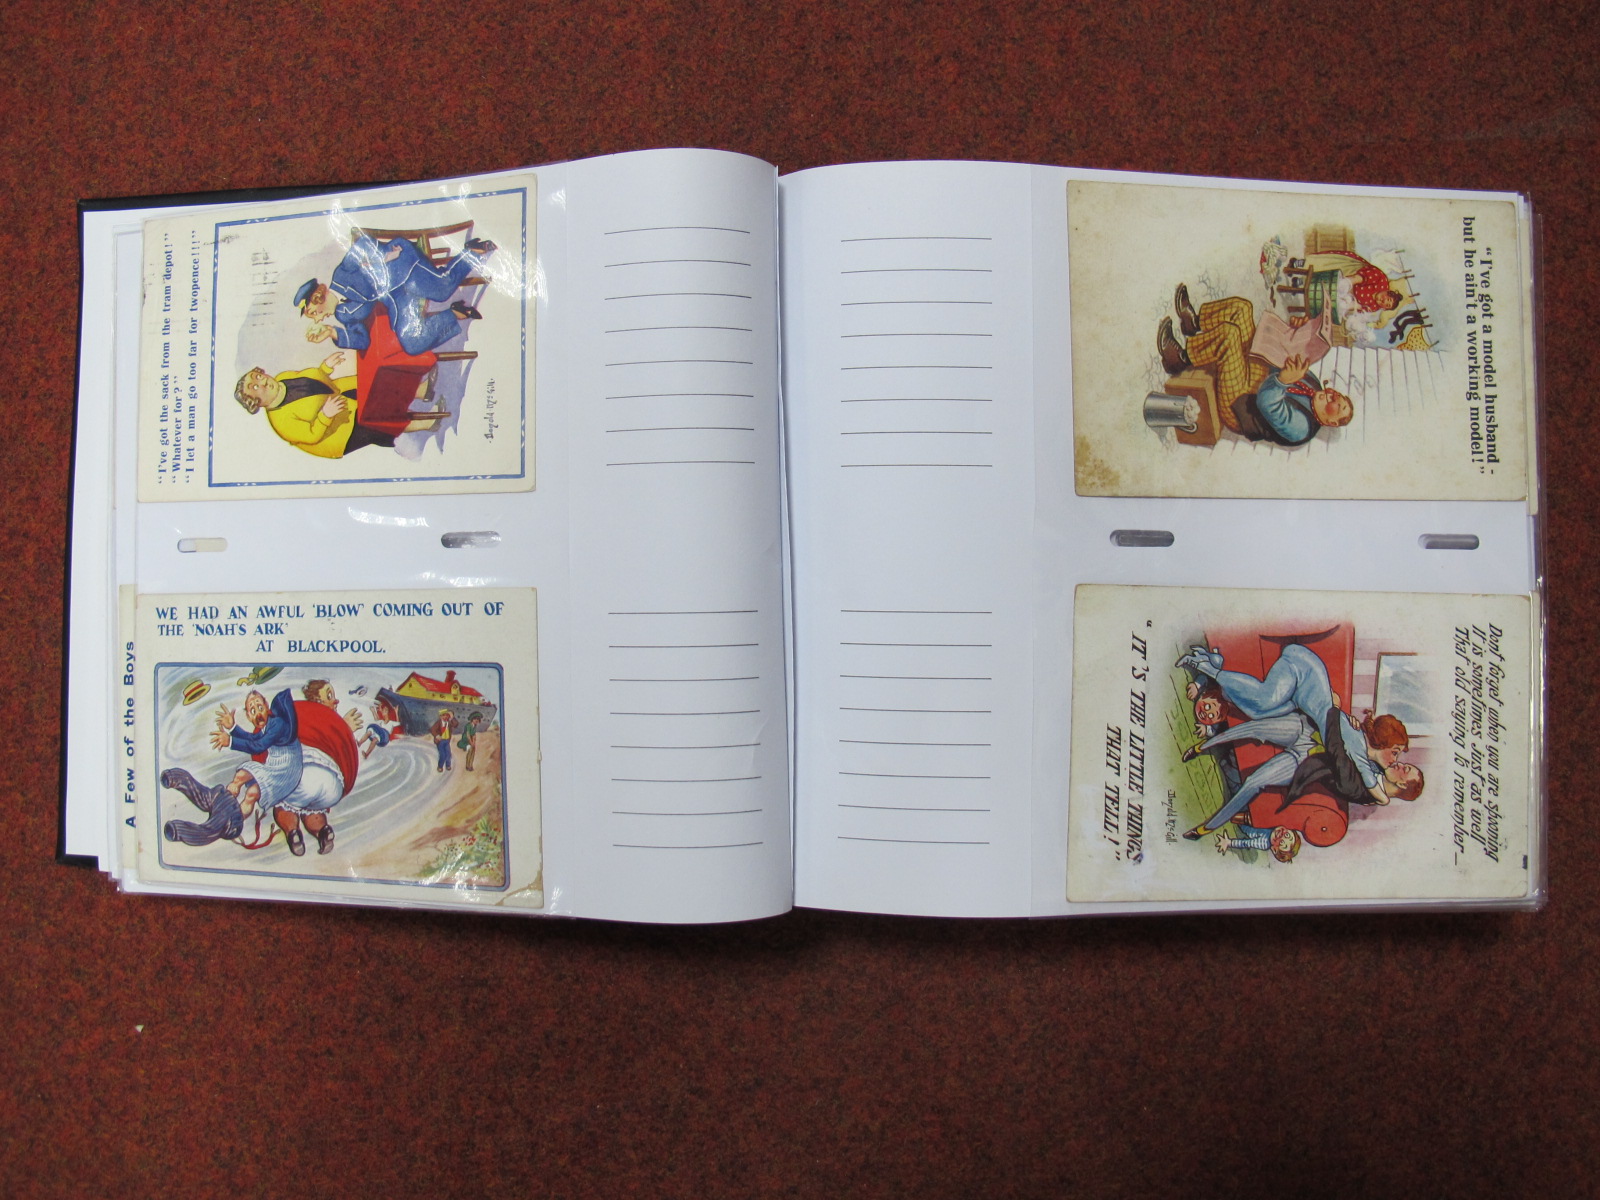 Approximately 200 Early Comic Postcards in a Modern Album.